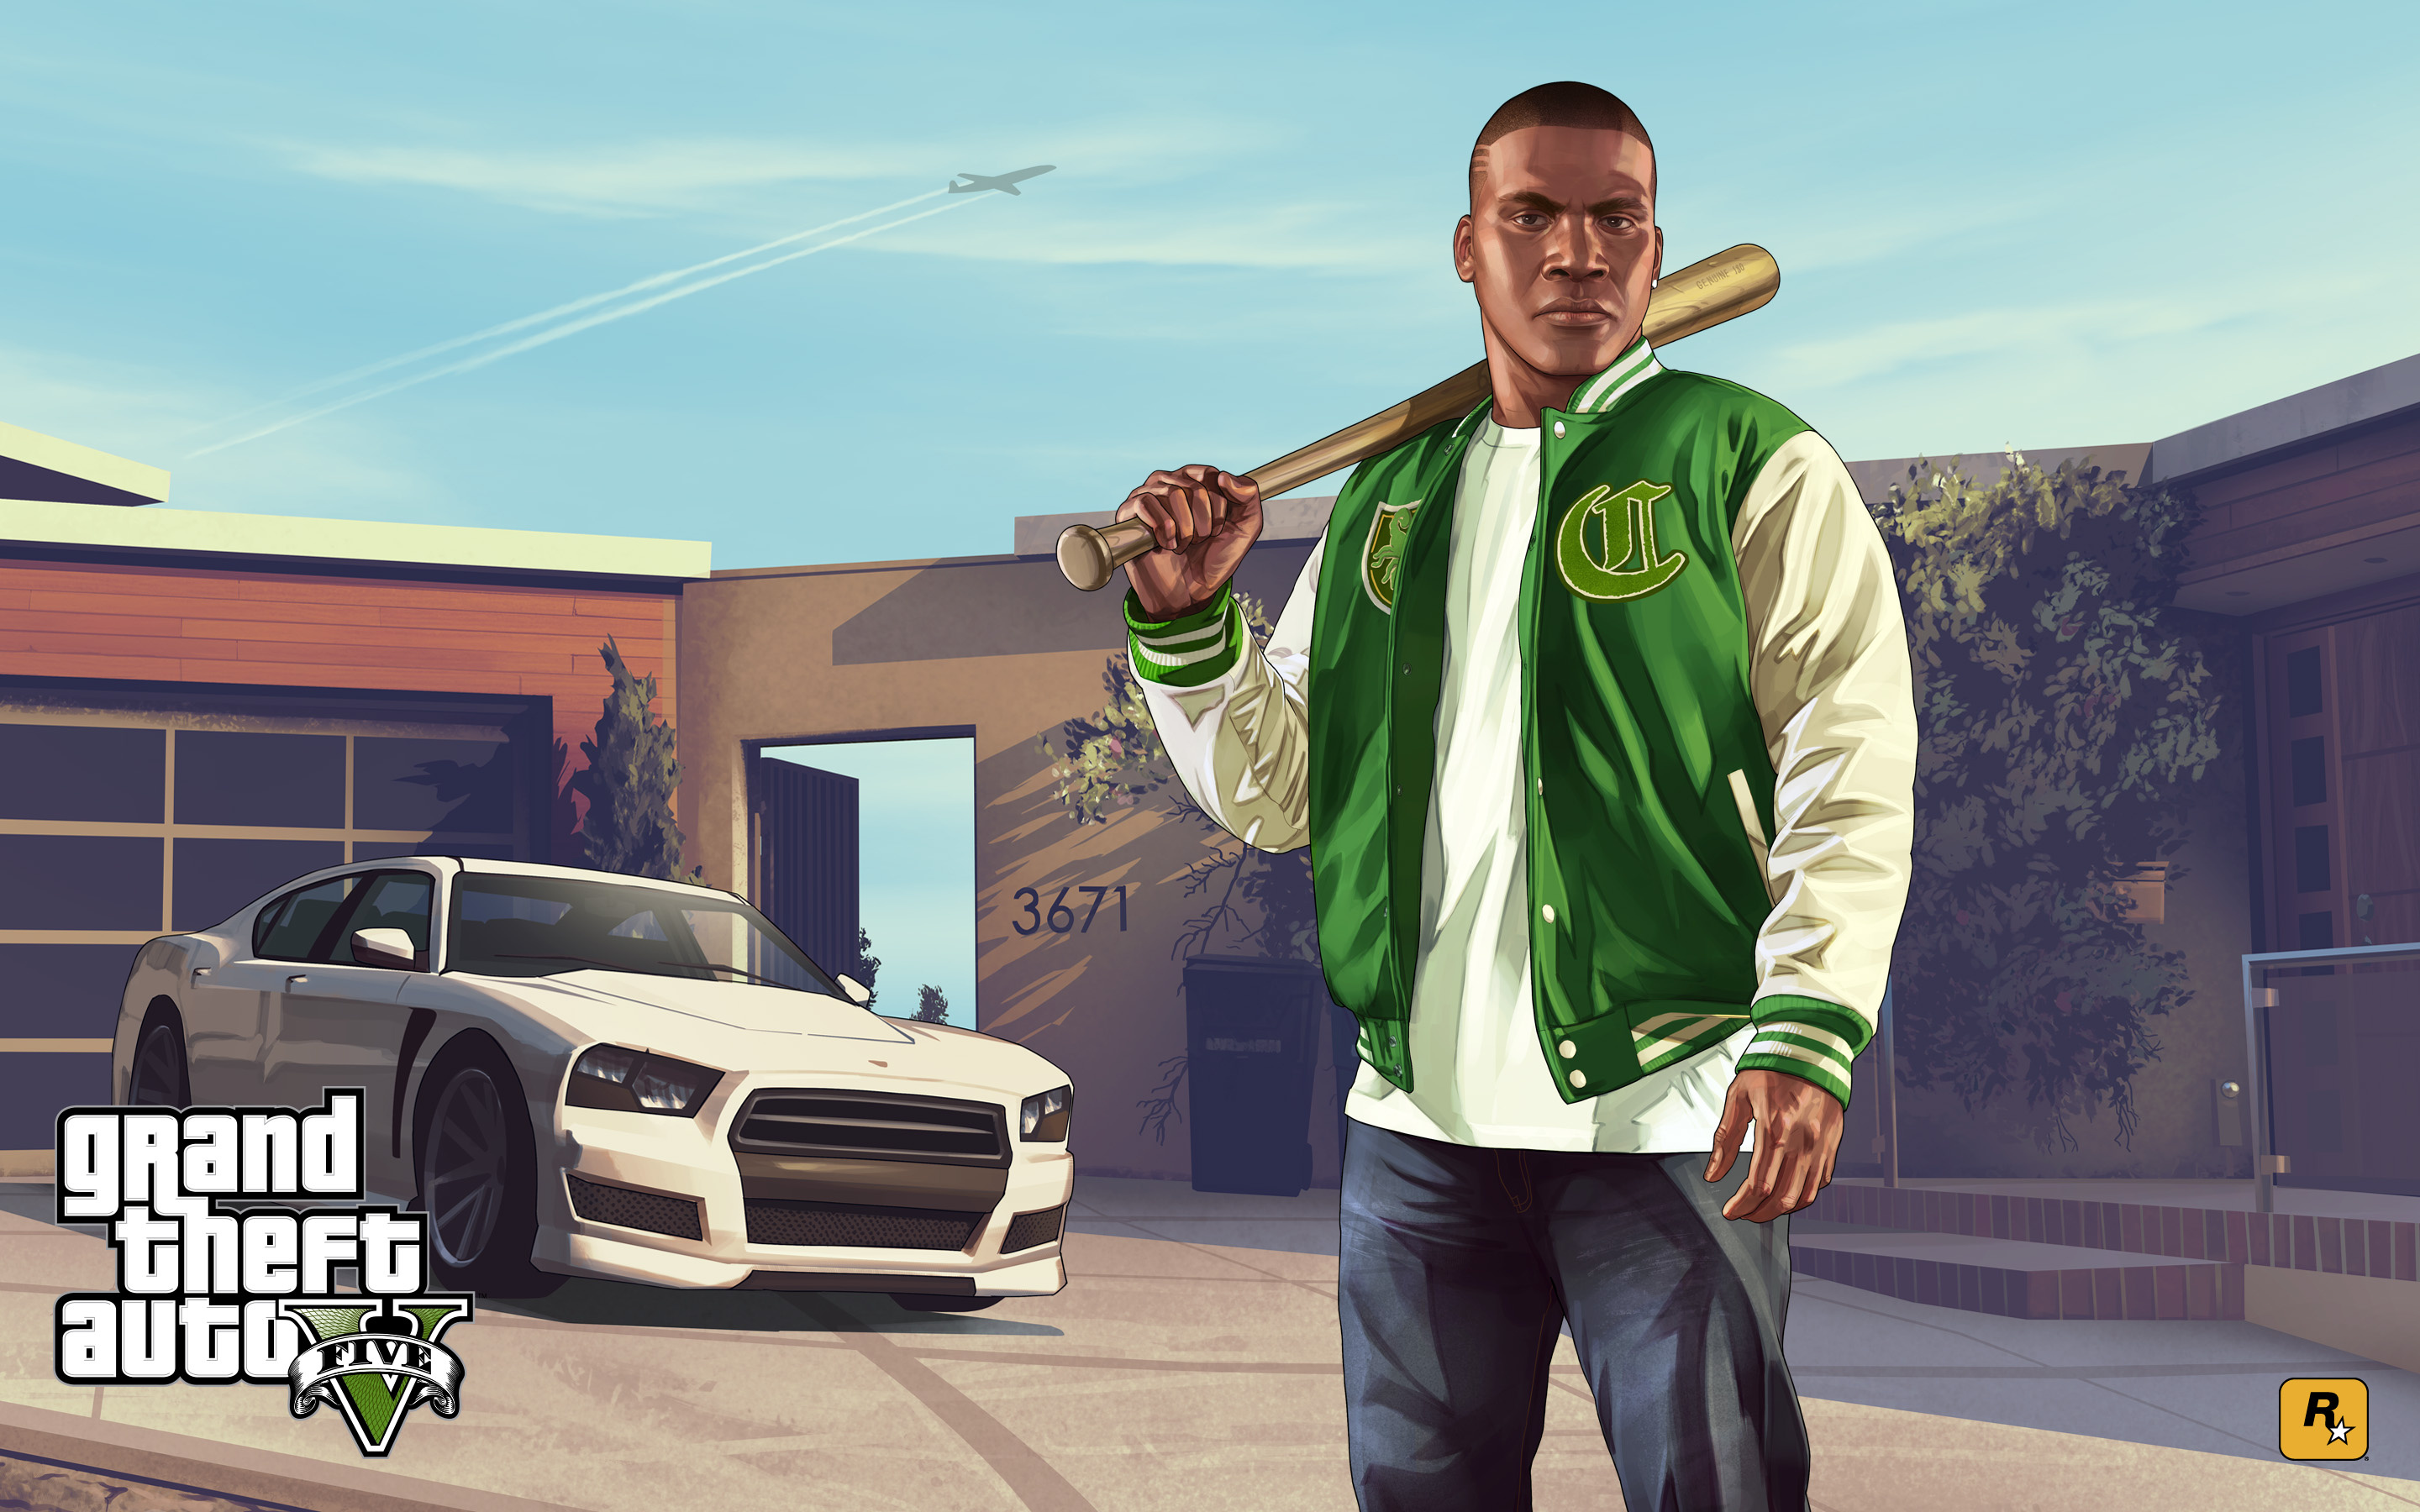 GTA V, Diverse wallpaper collection, Immersive gaming experience, Rockstar Games' iconic title, 2880x1800 HD Desktop